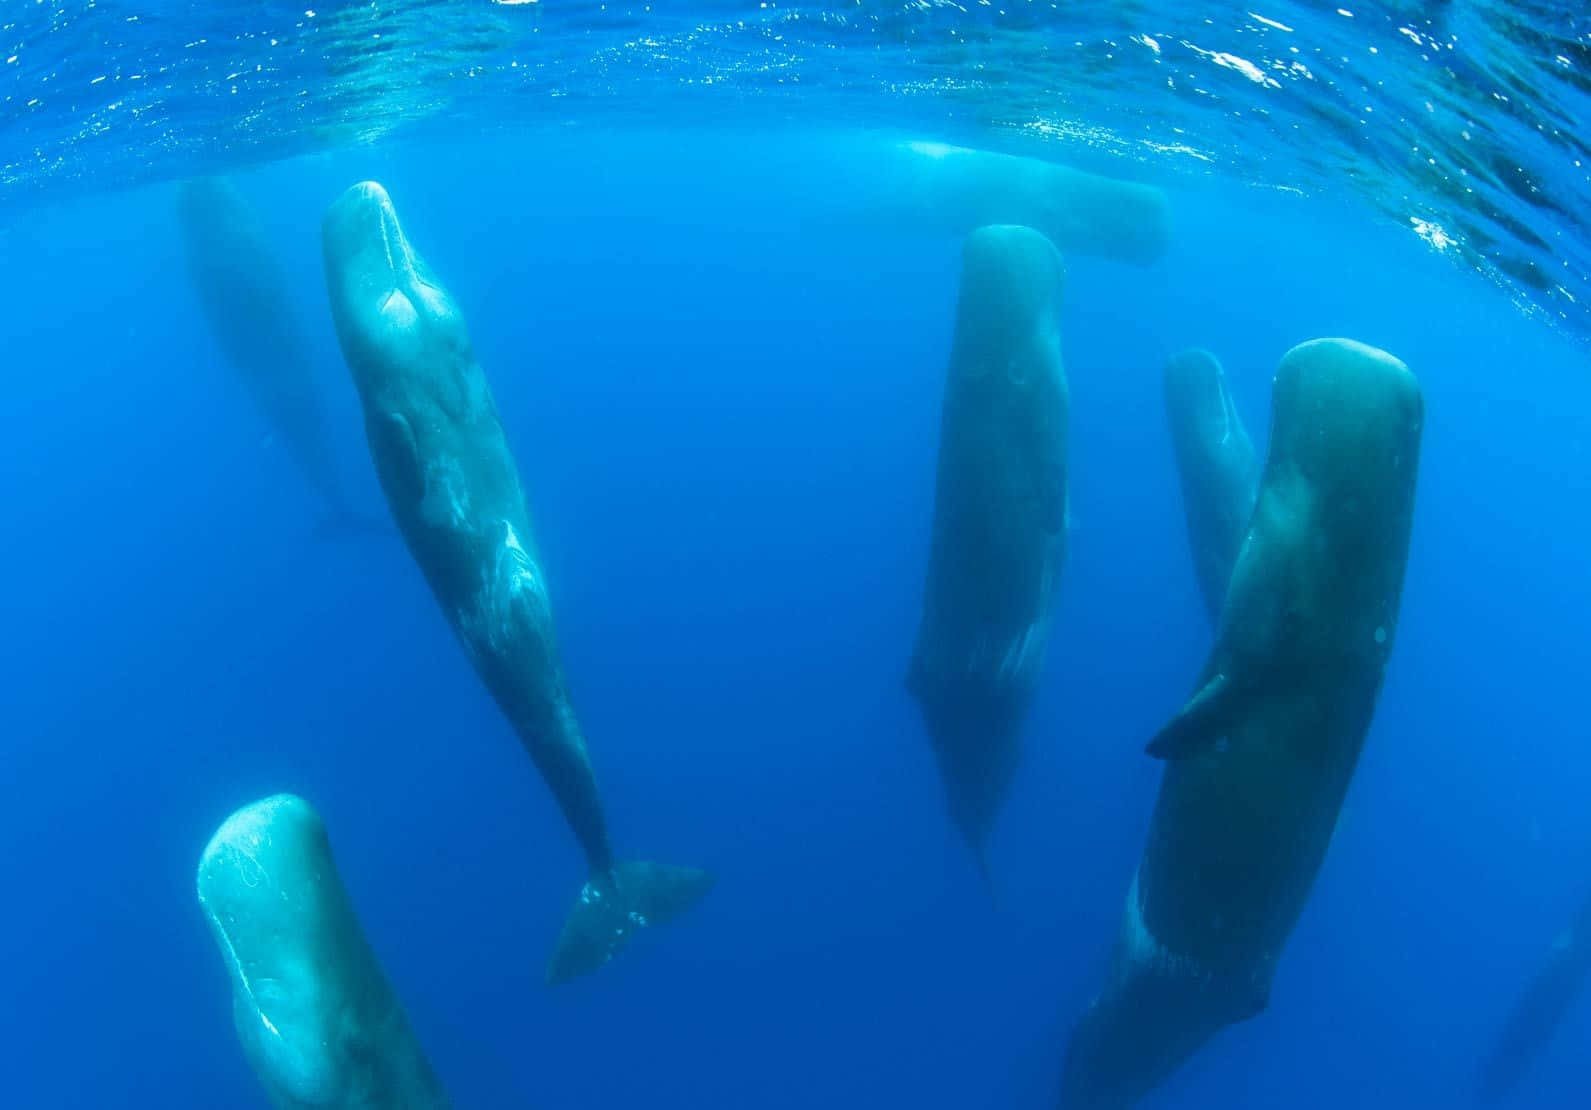 A Group Of Whales Swimming In The Ocean